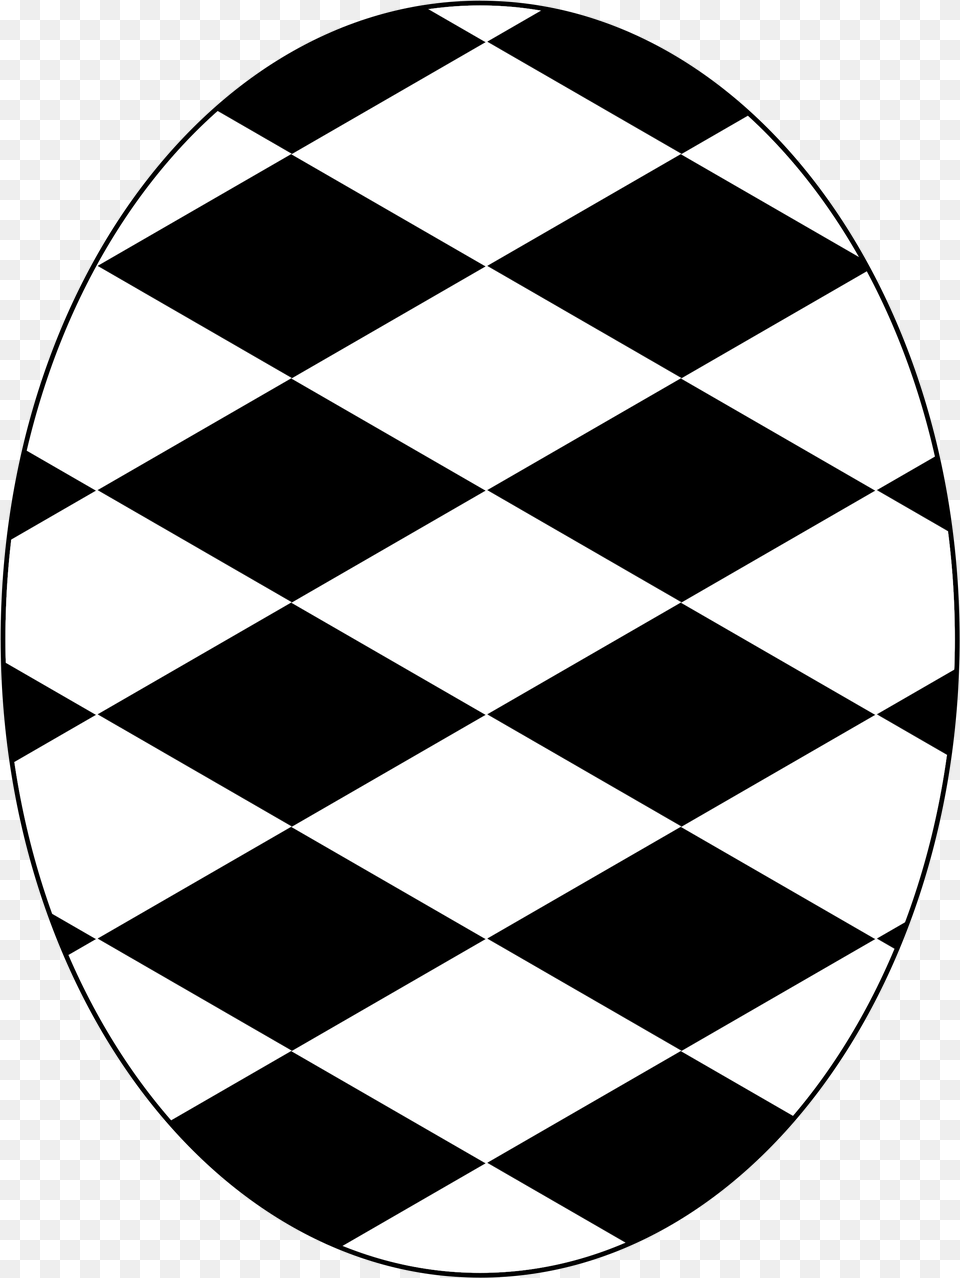 Pattern Diamond Checkered Black And White Kids Bathroom Ideas, Food Png Image